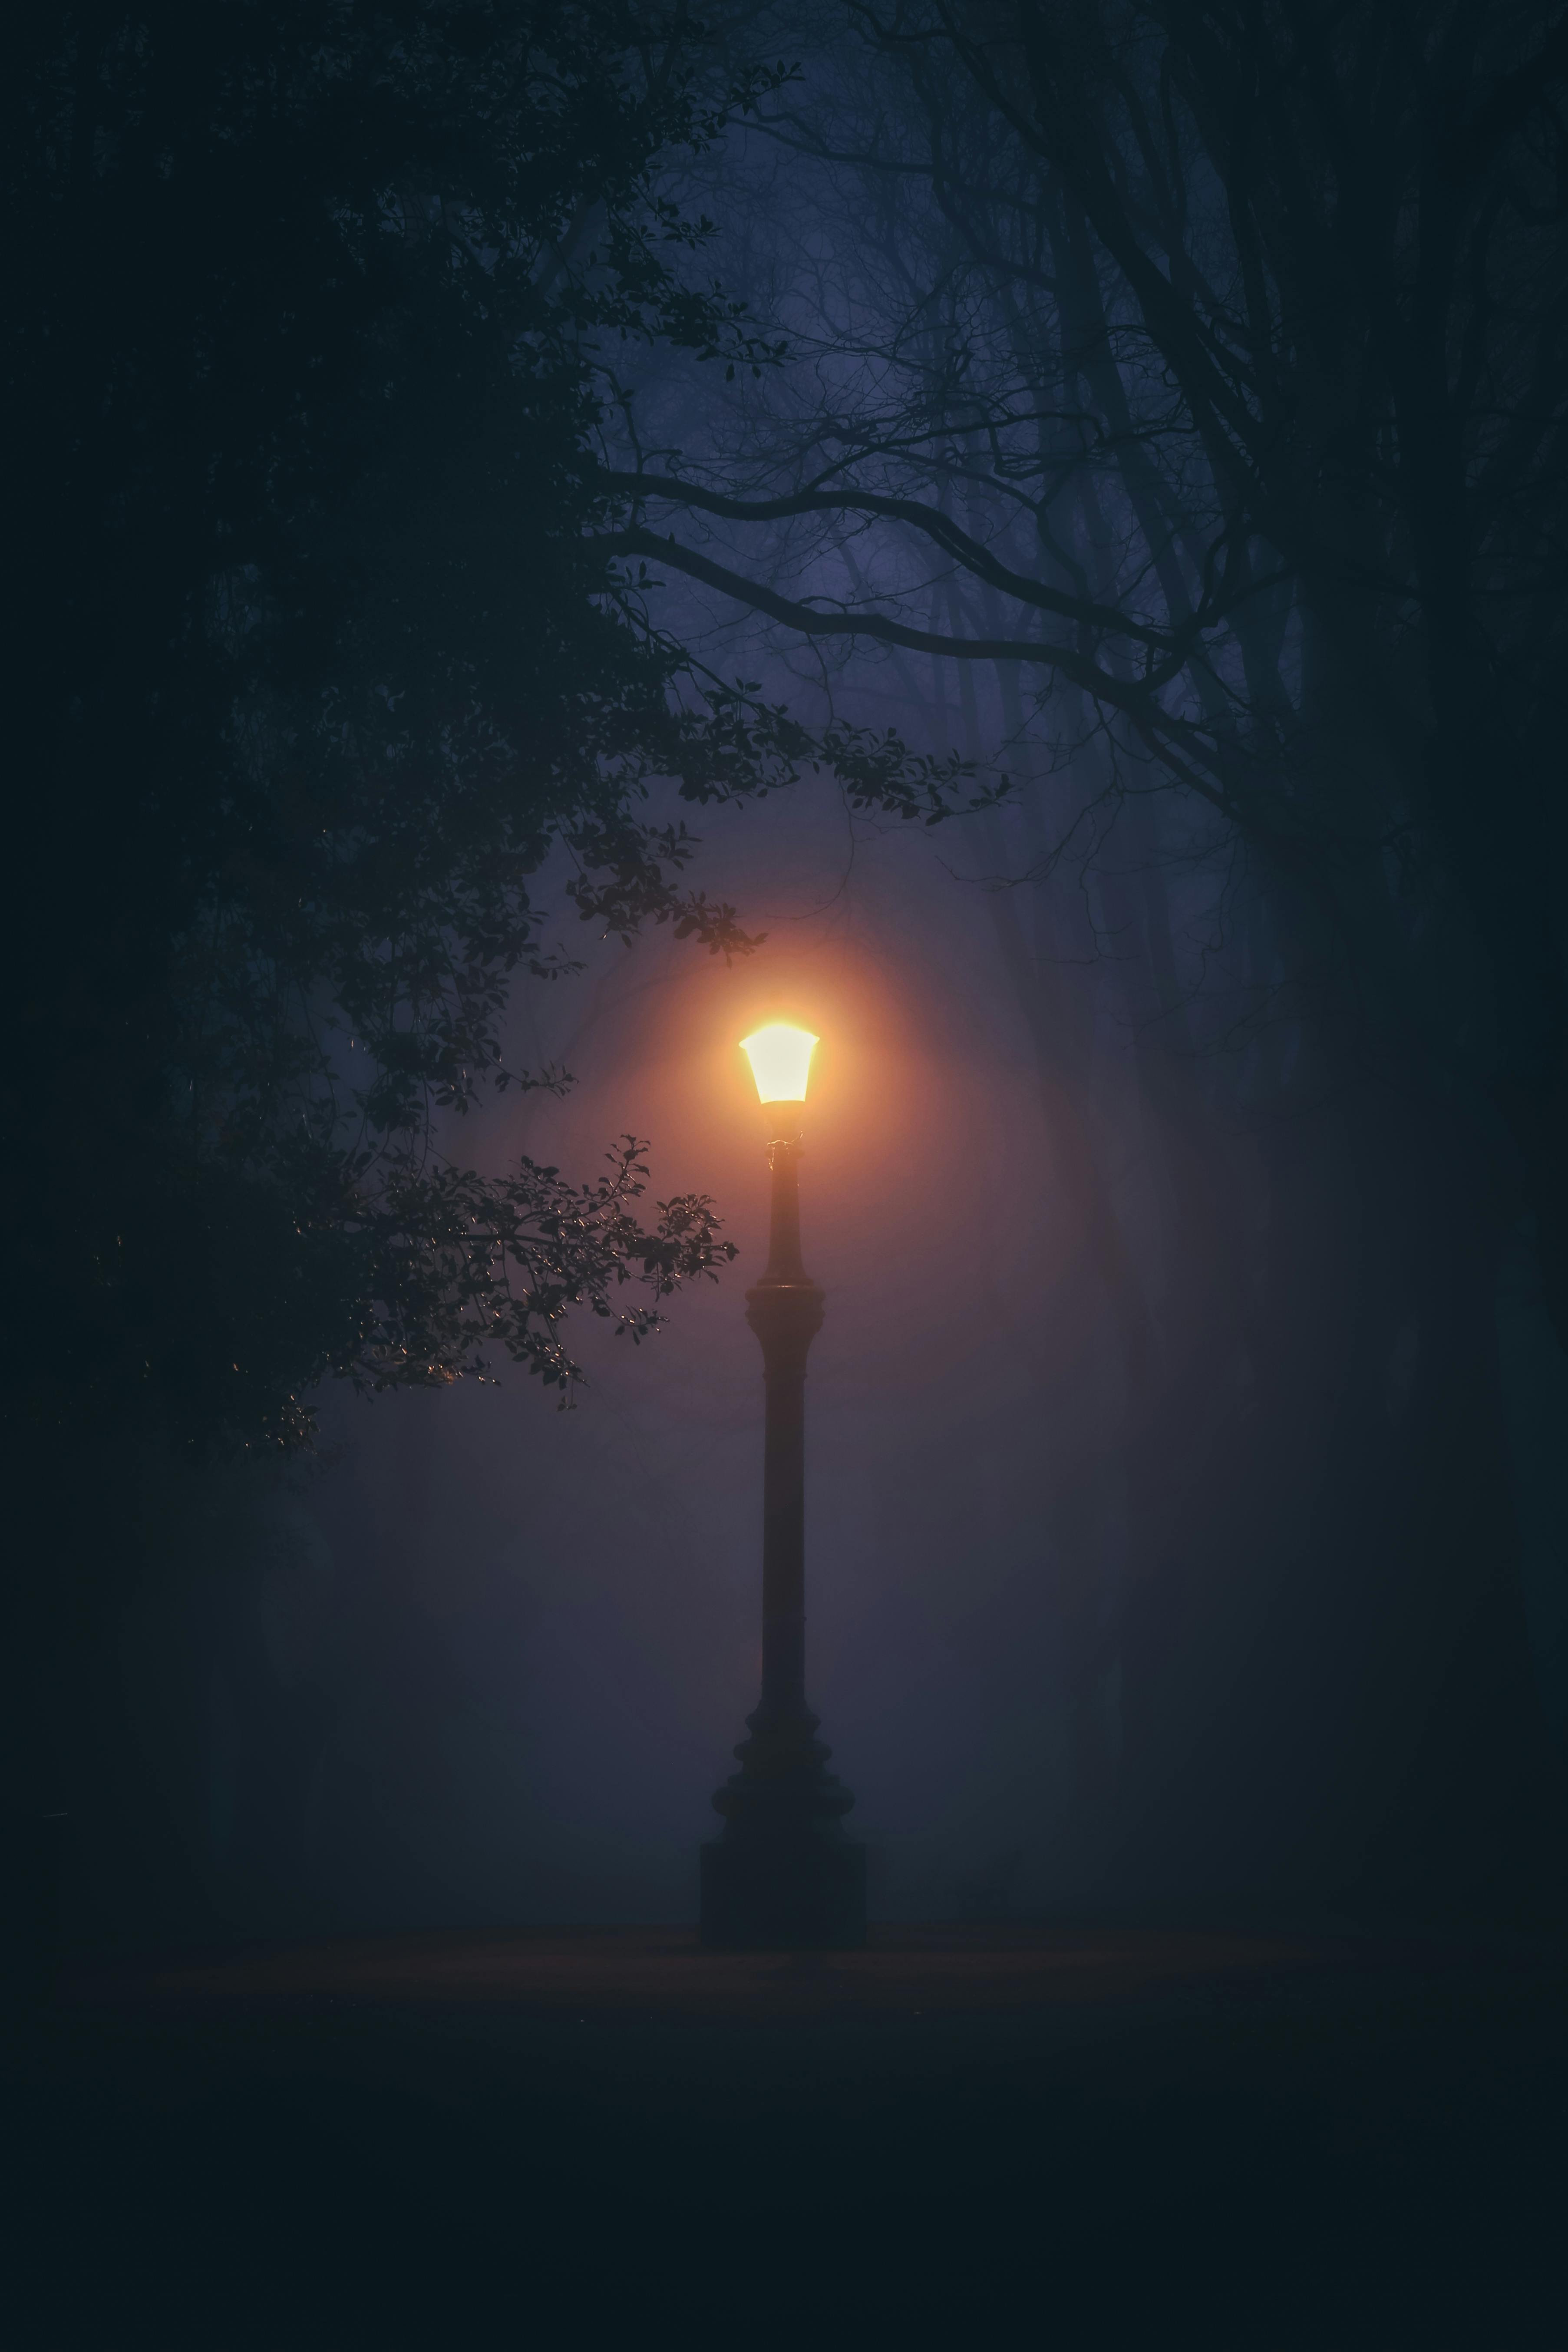 Black Street Lamp Turned On During Night Time · Free Stock Photo